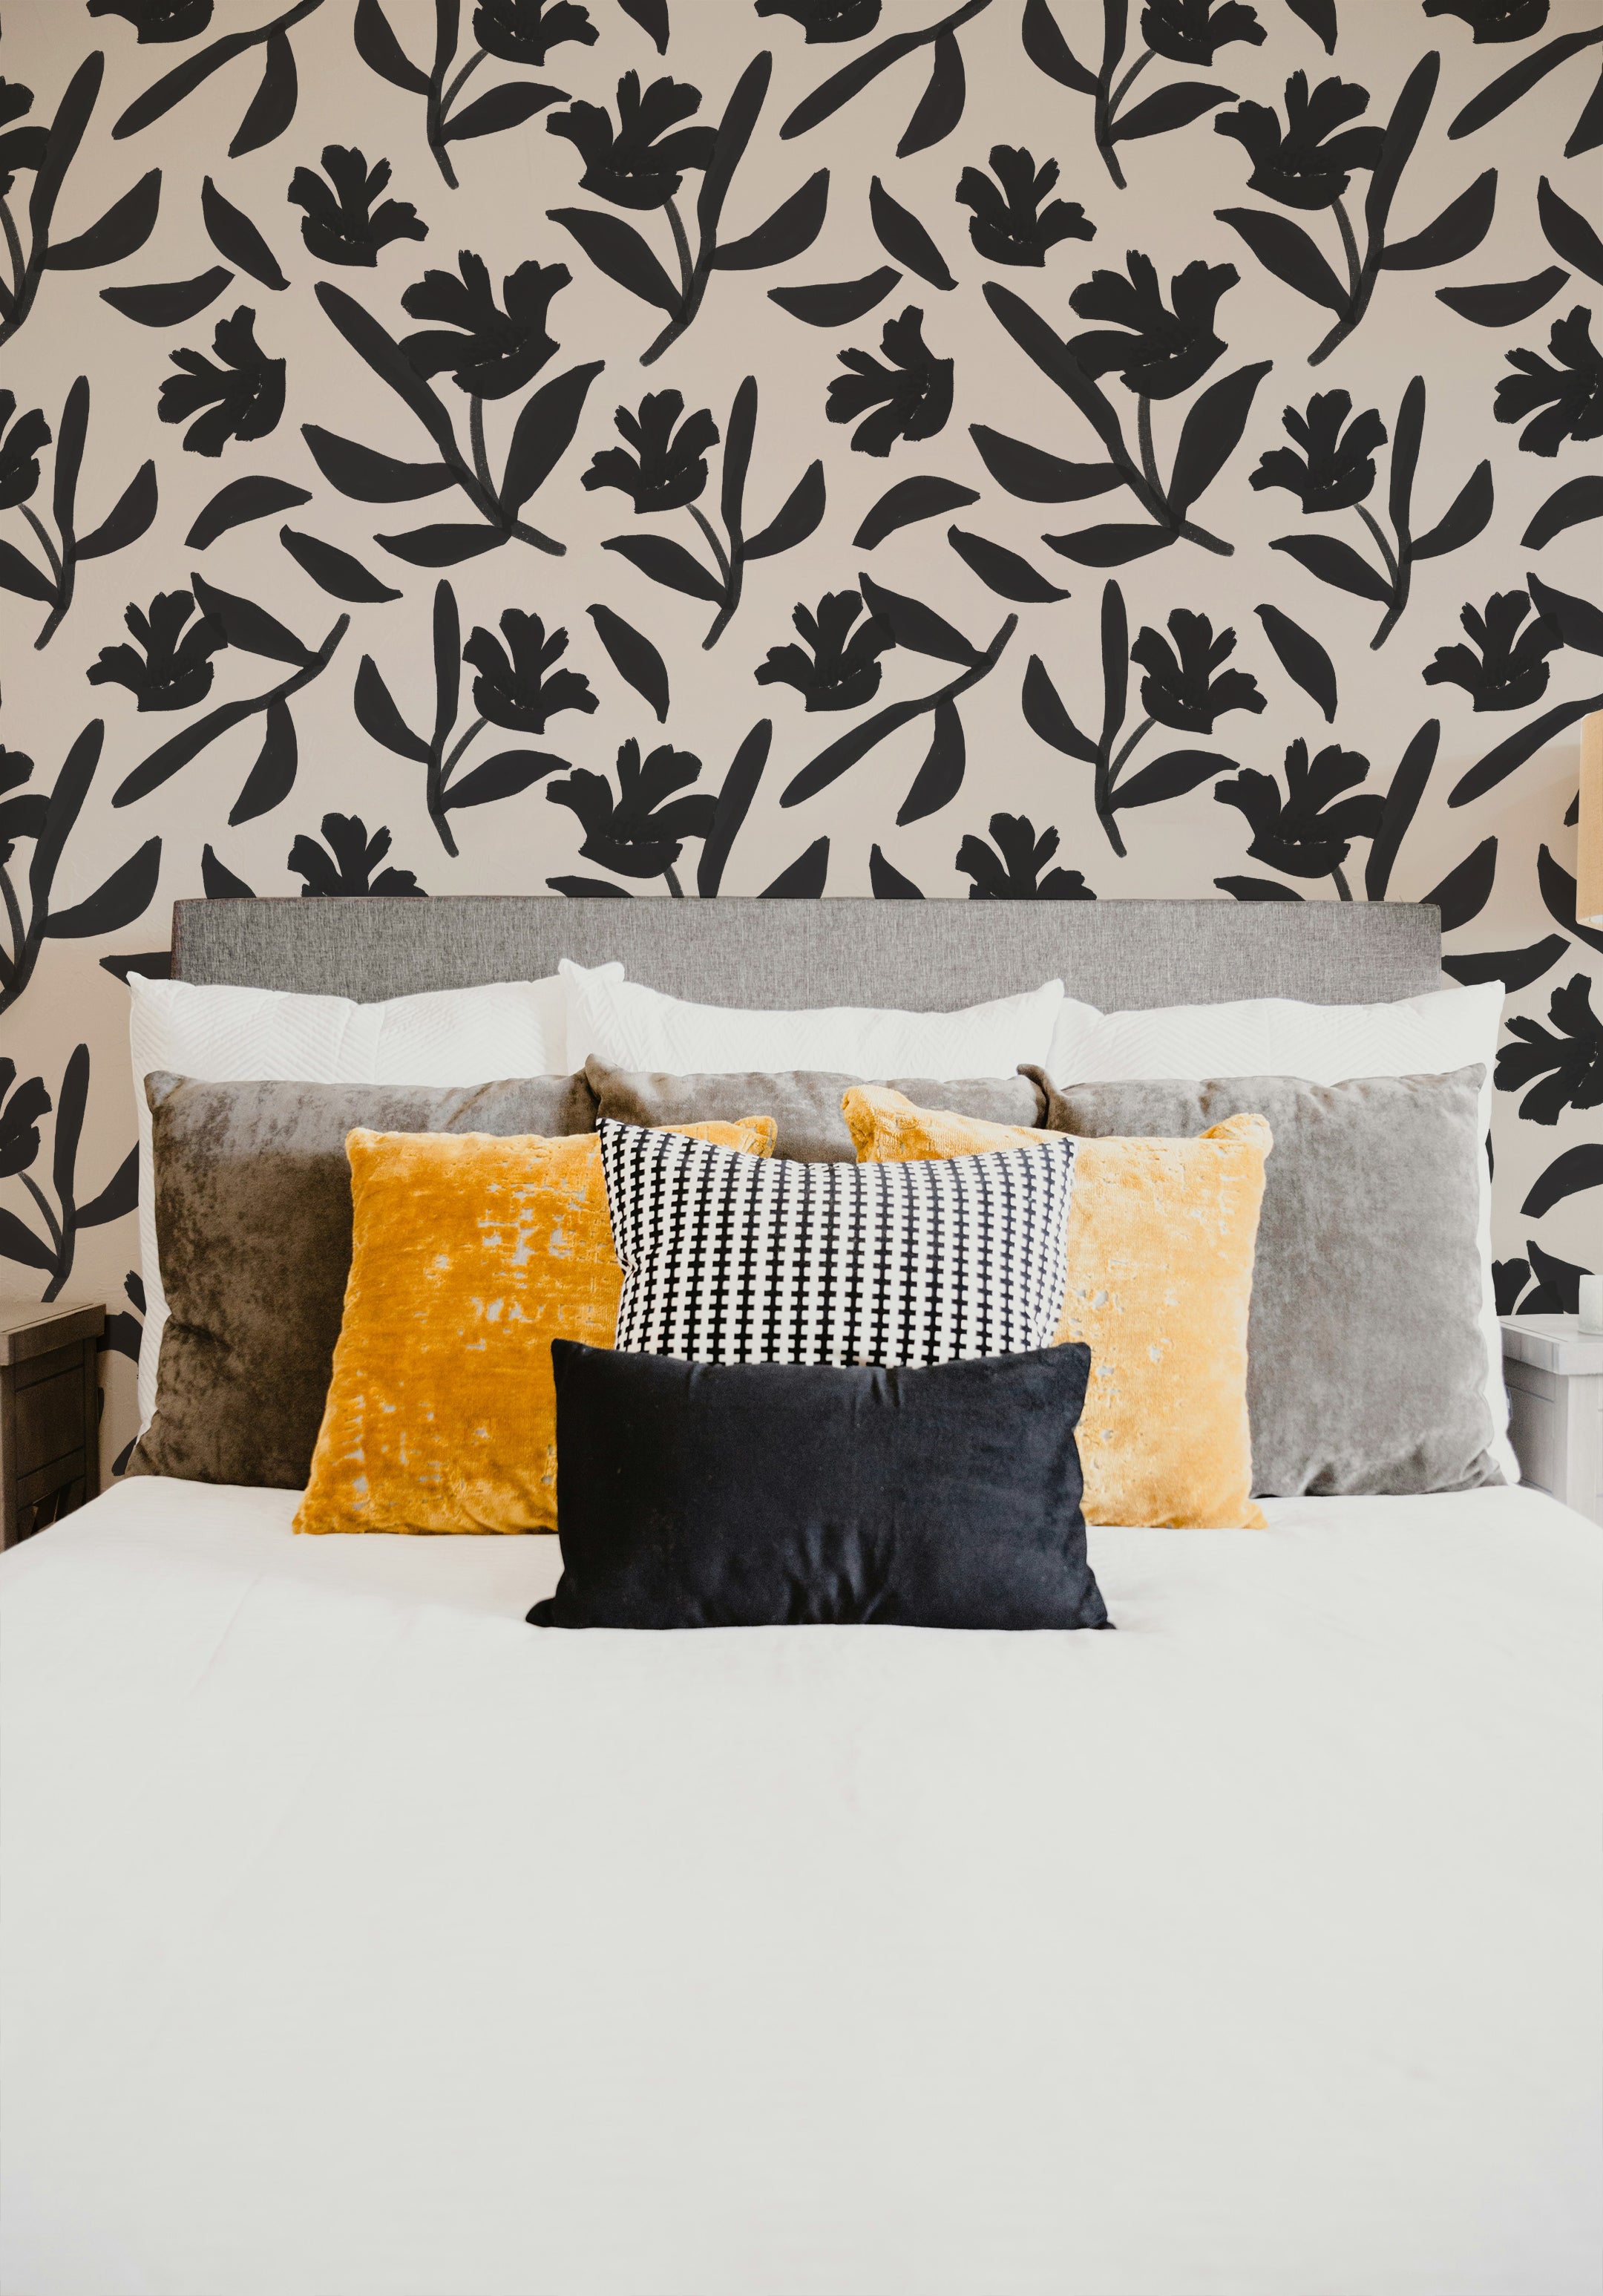 Elegant bedroom featuring a wall covered with a black floral pattern on a beige background. The bed is adorned with pillows in shades of yellow, grey, and a black and white pattern, creating a stylish and inviting atmosphere.